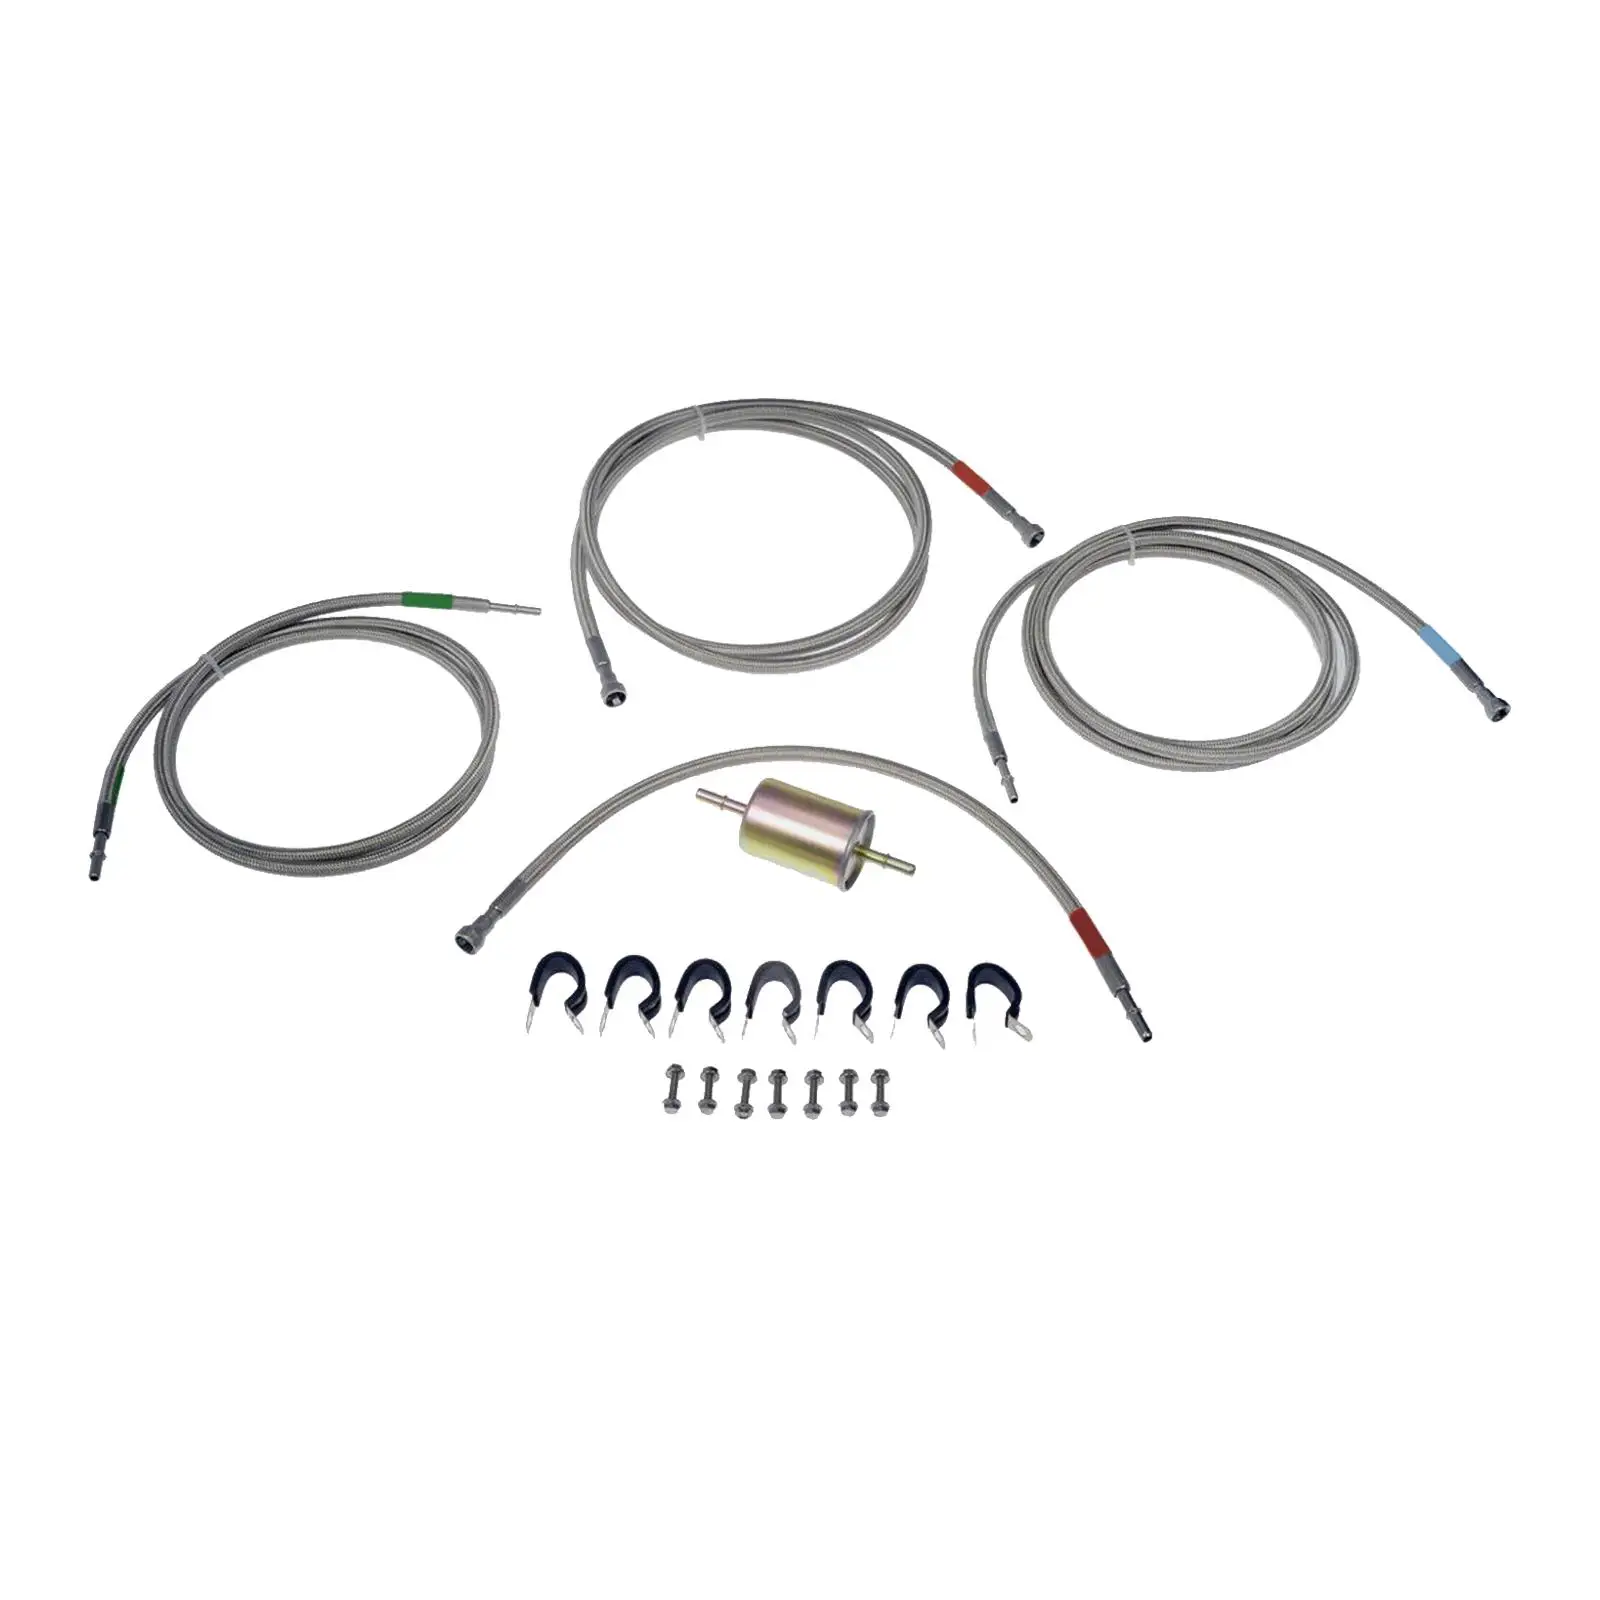 Fuel Line 819-840 Spare Parts Easy to Install Repair Parts Flexible Steel Braided Professional Replacement for GMC Sierra